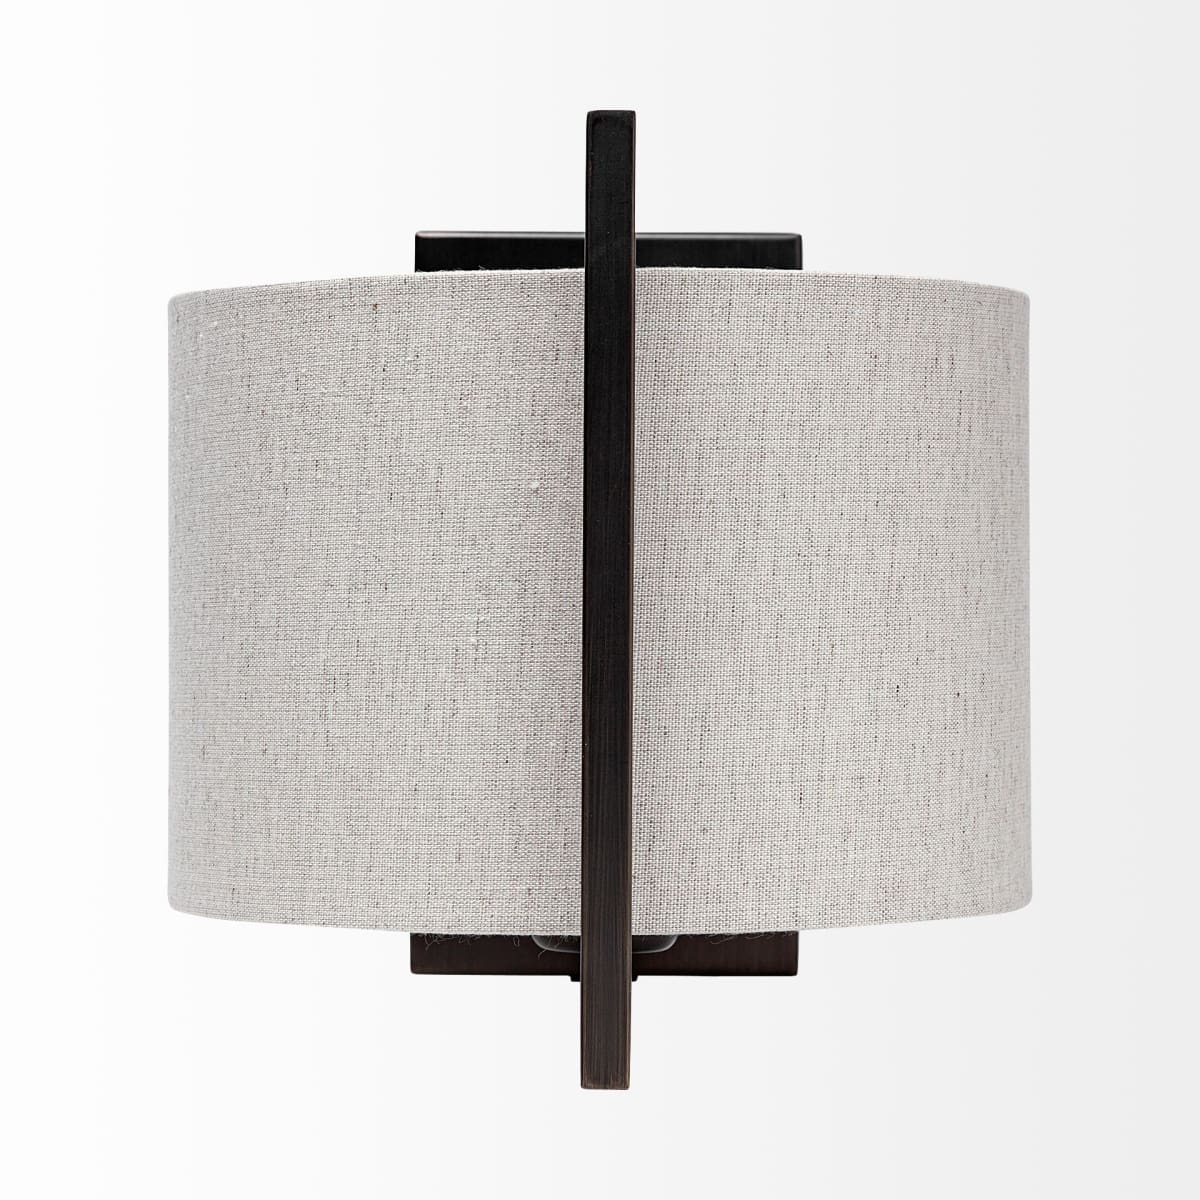 Smithe Wall Sconce Black Metal | Cream Shade - wall-fixtures